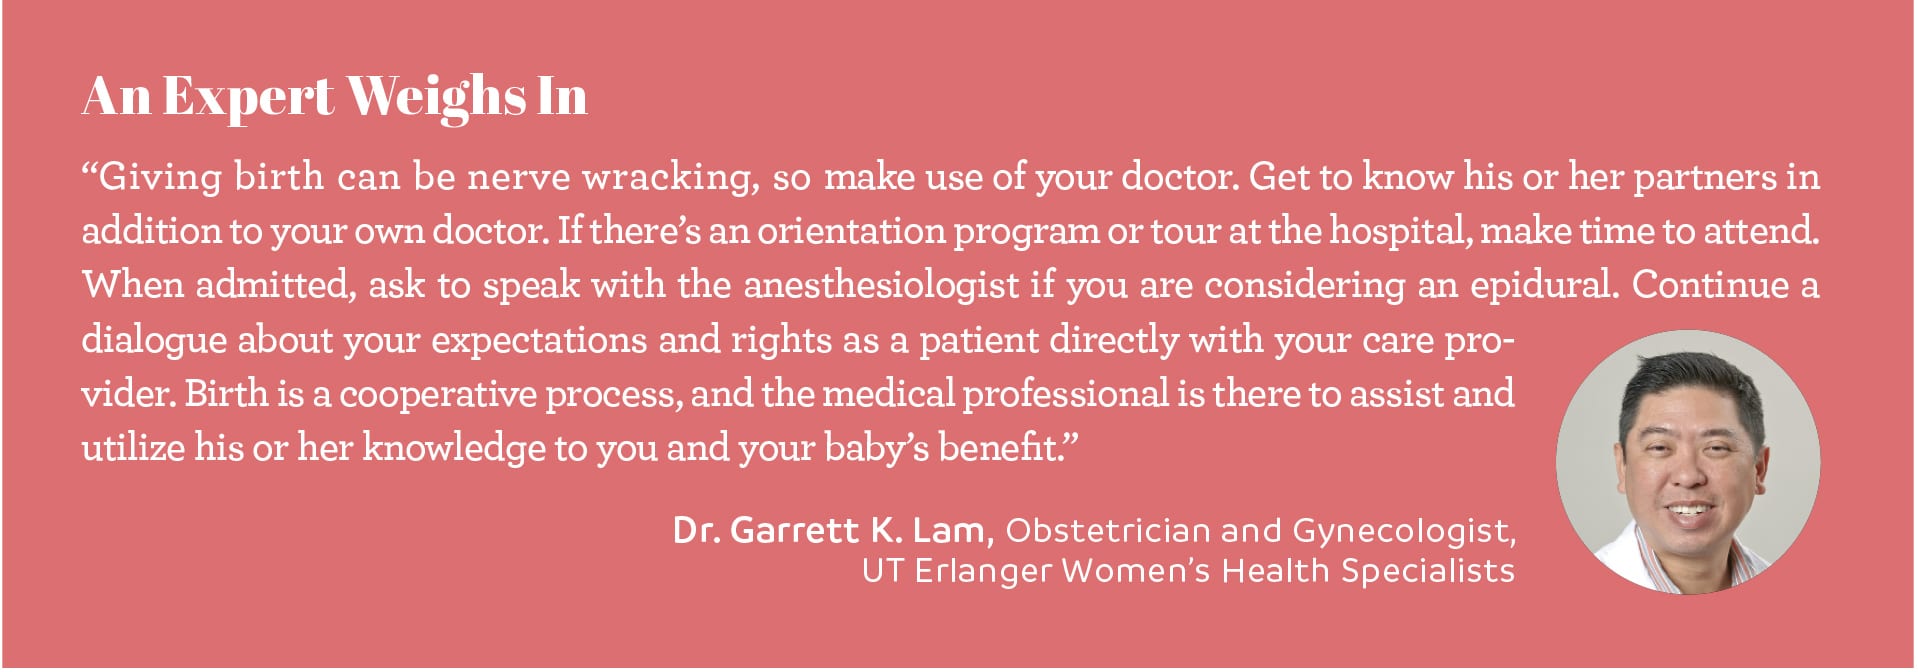 expert opinion giving birth stages of labor doctor garrett k lam obgyn ut earlanger women's health specialists chattanooga